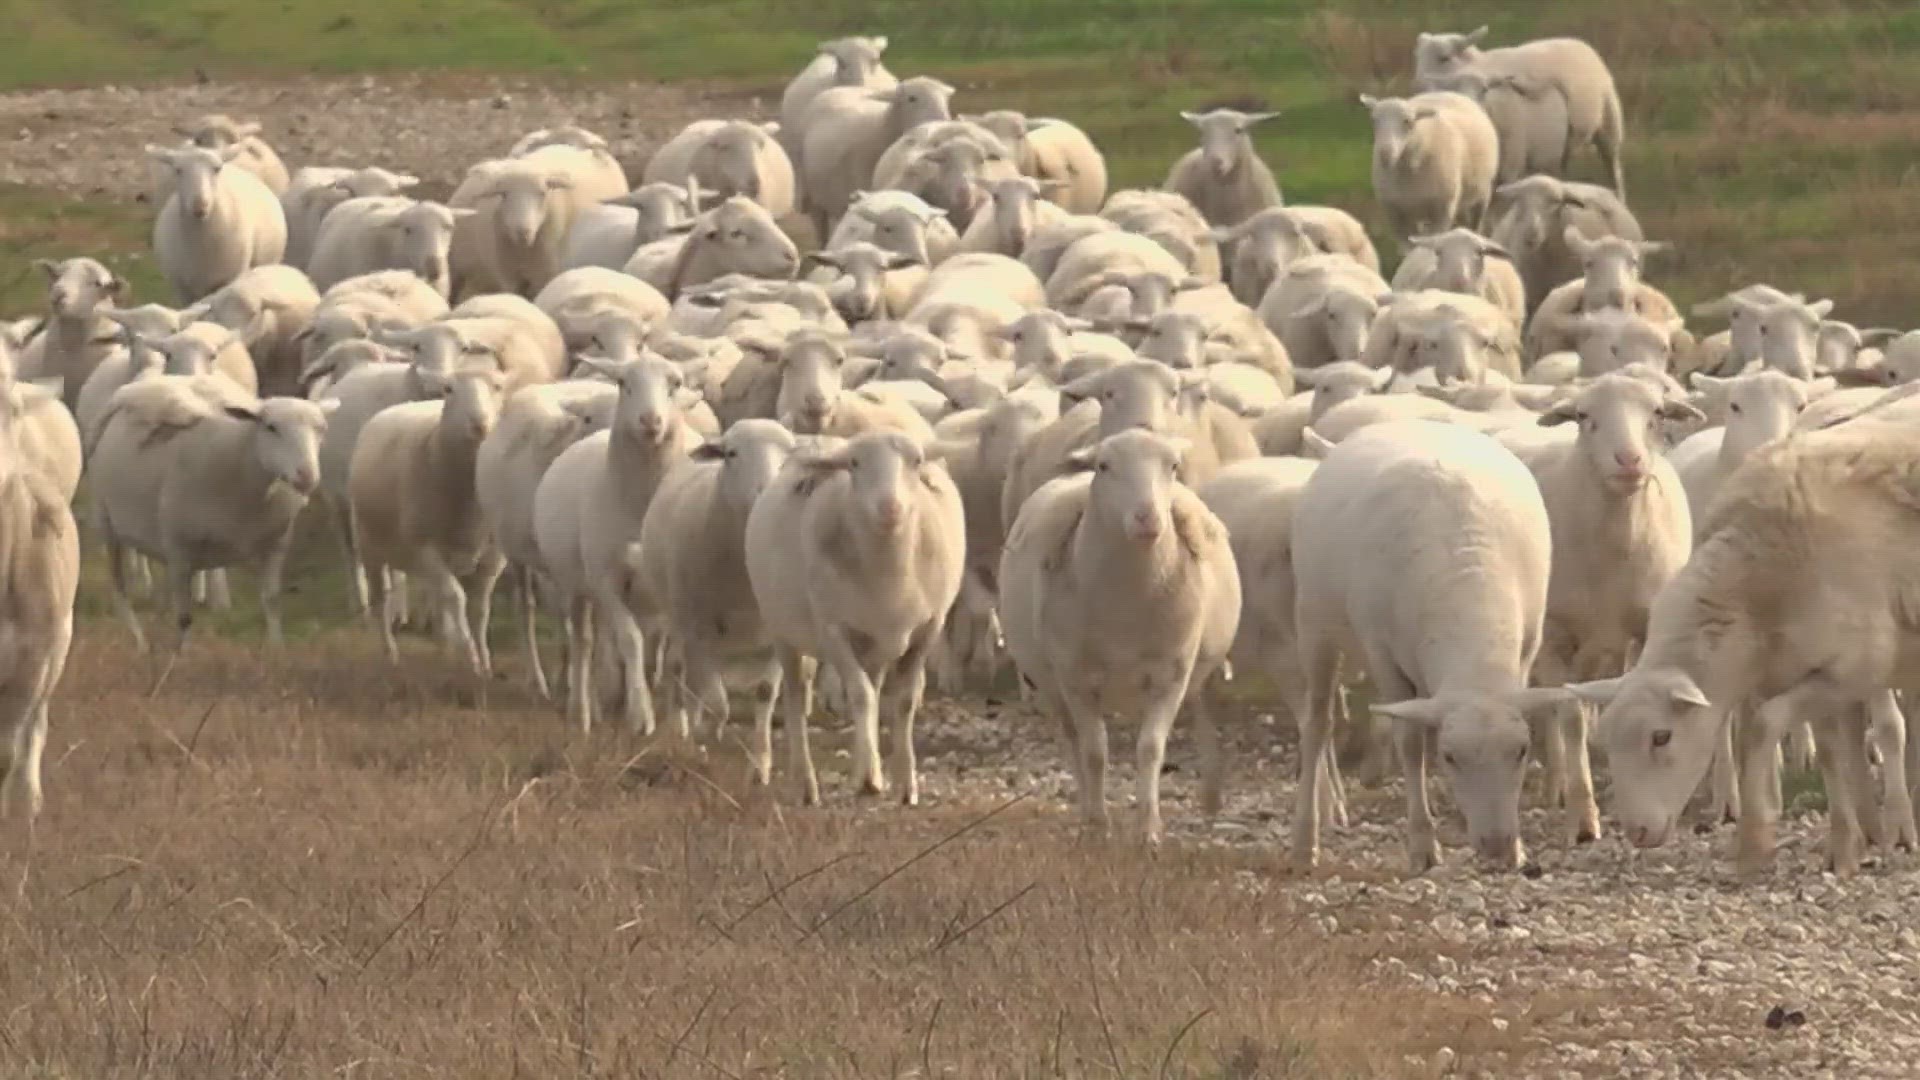 Texas Solar Sheep supplies sheep for solar generating facilities across the state to save money.